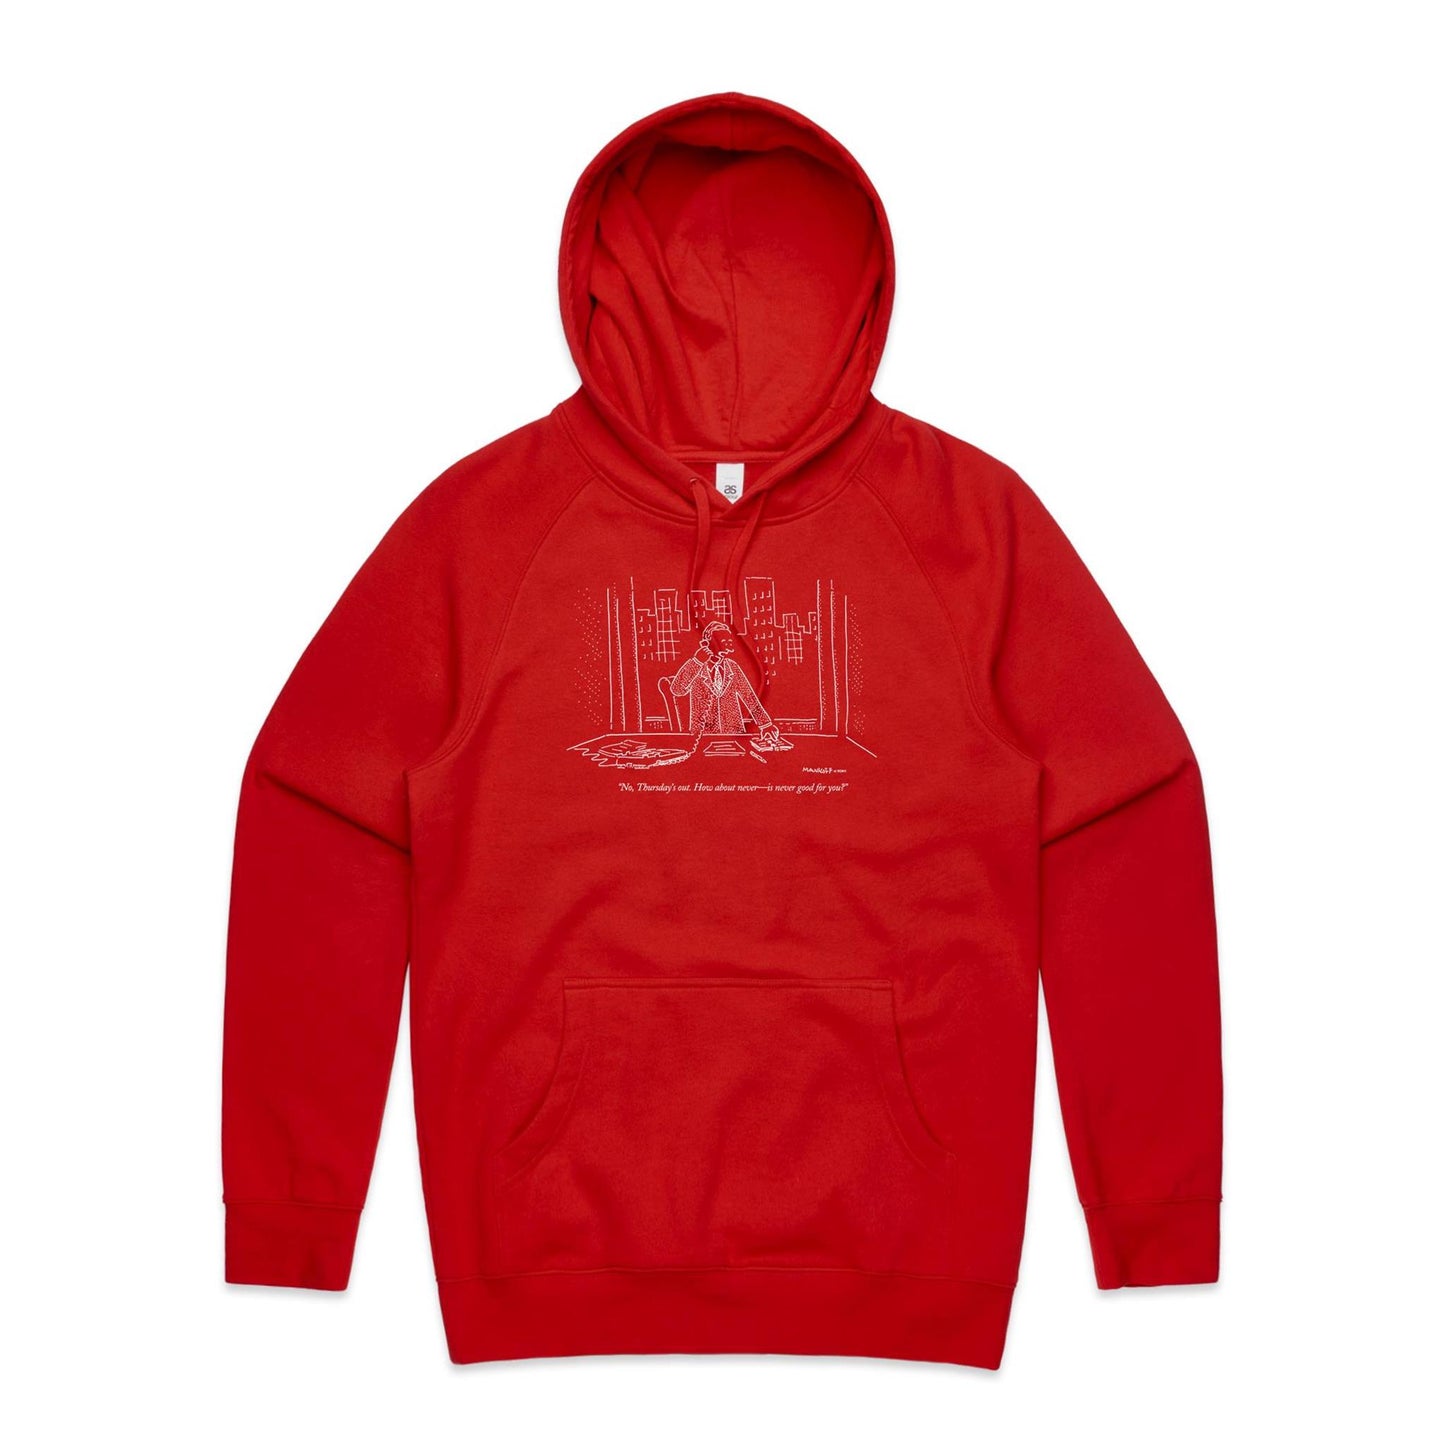 How About Never Hoodies for Men (Unisex)